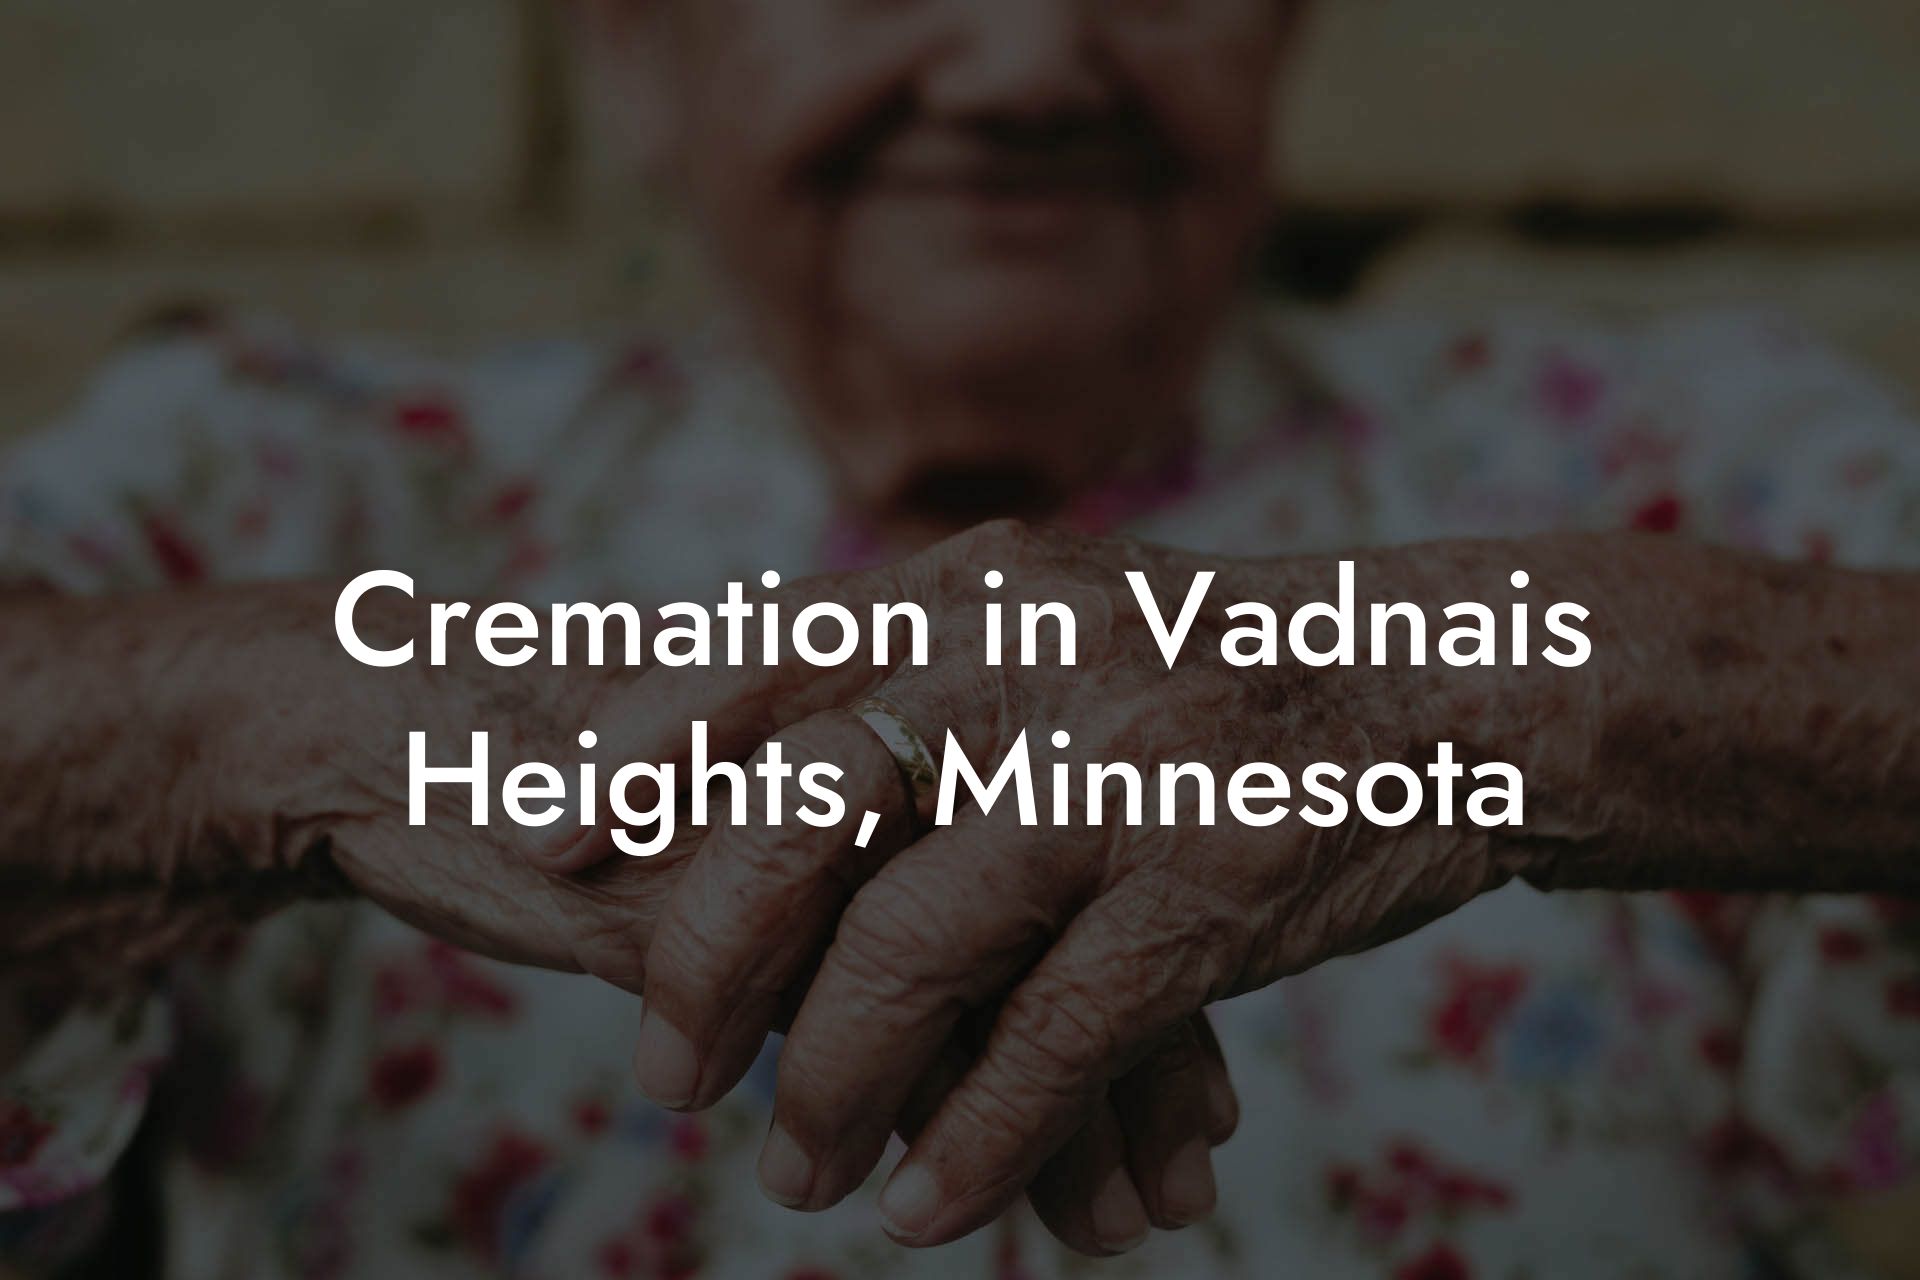 Cremation in Vadnais Heights, Minnesota